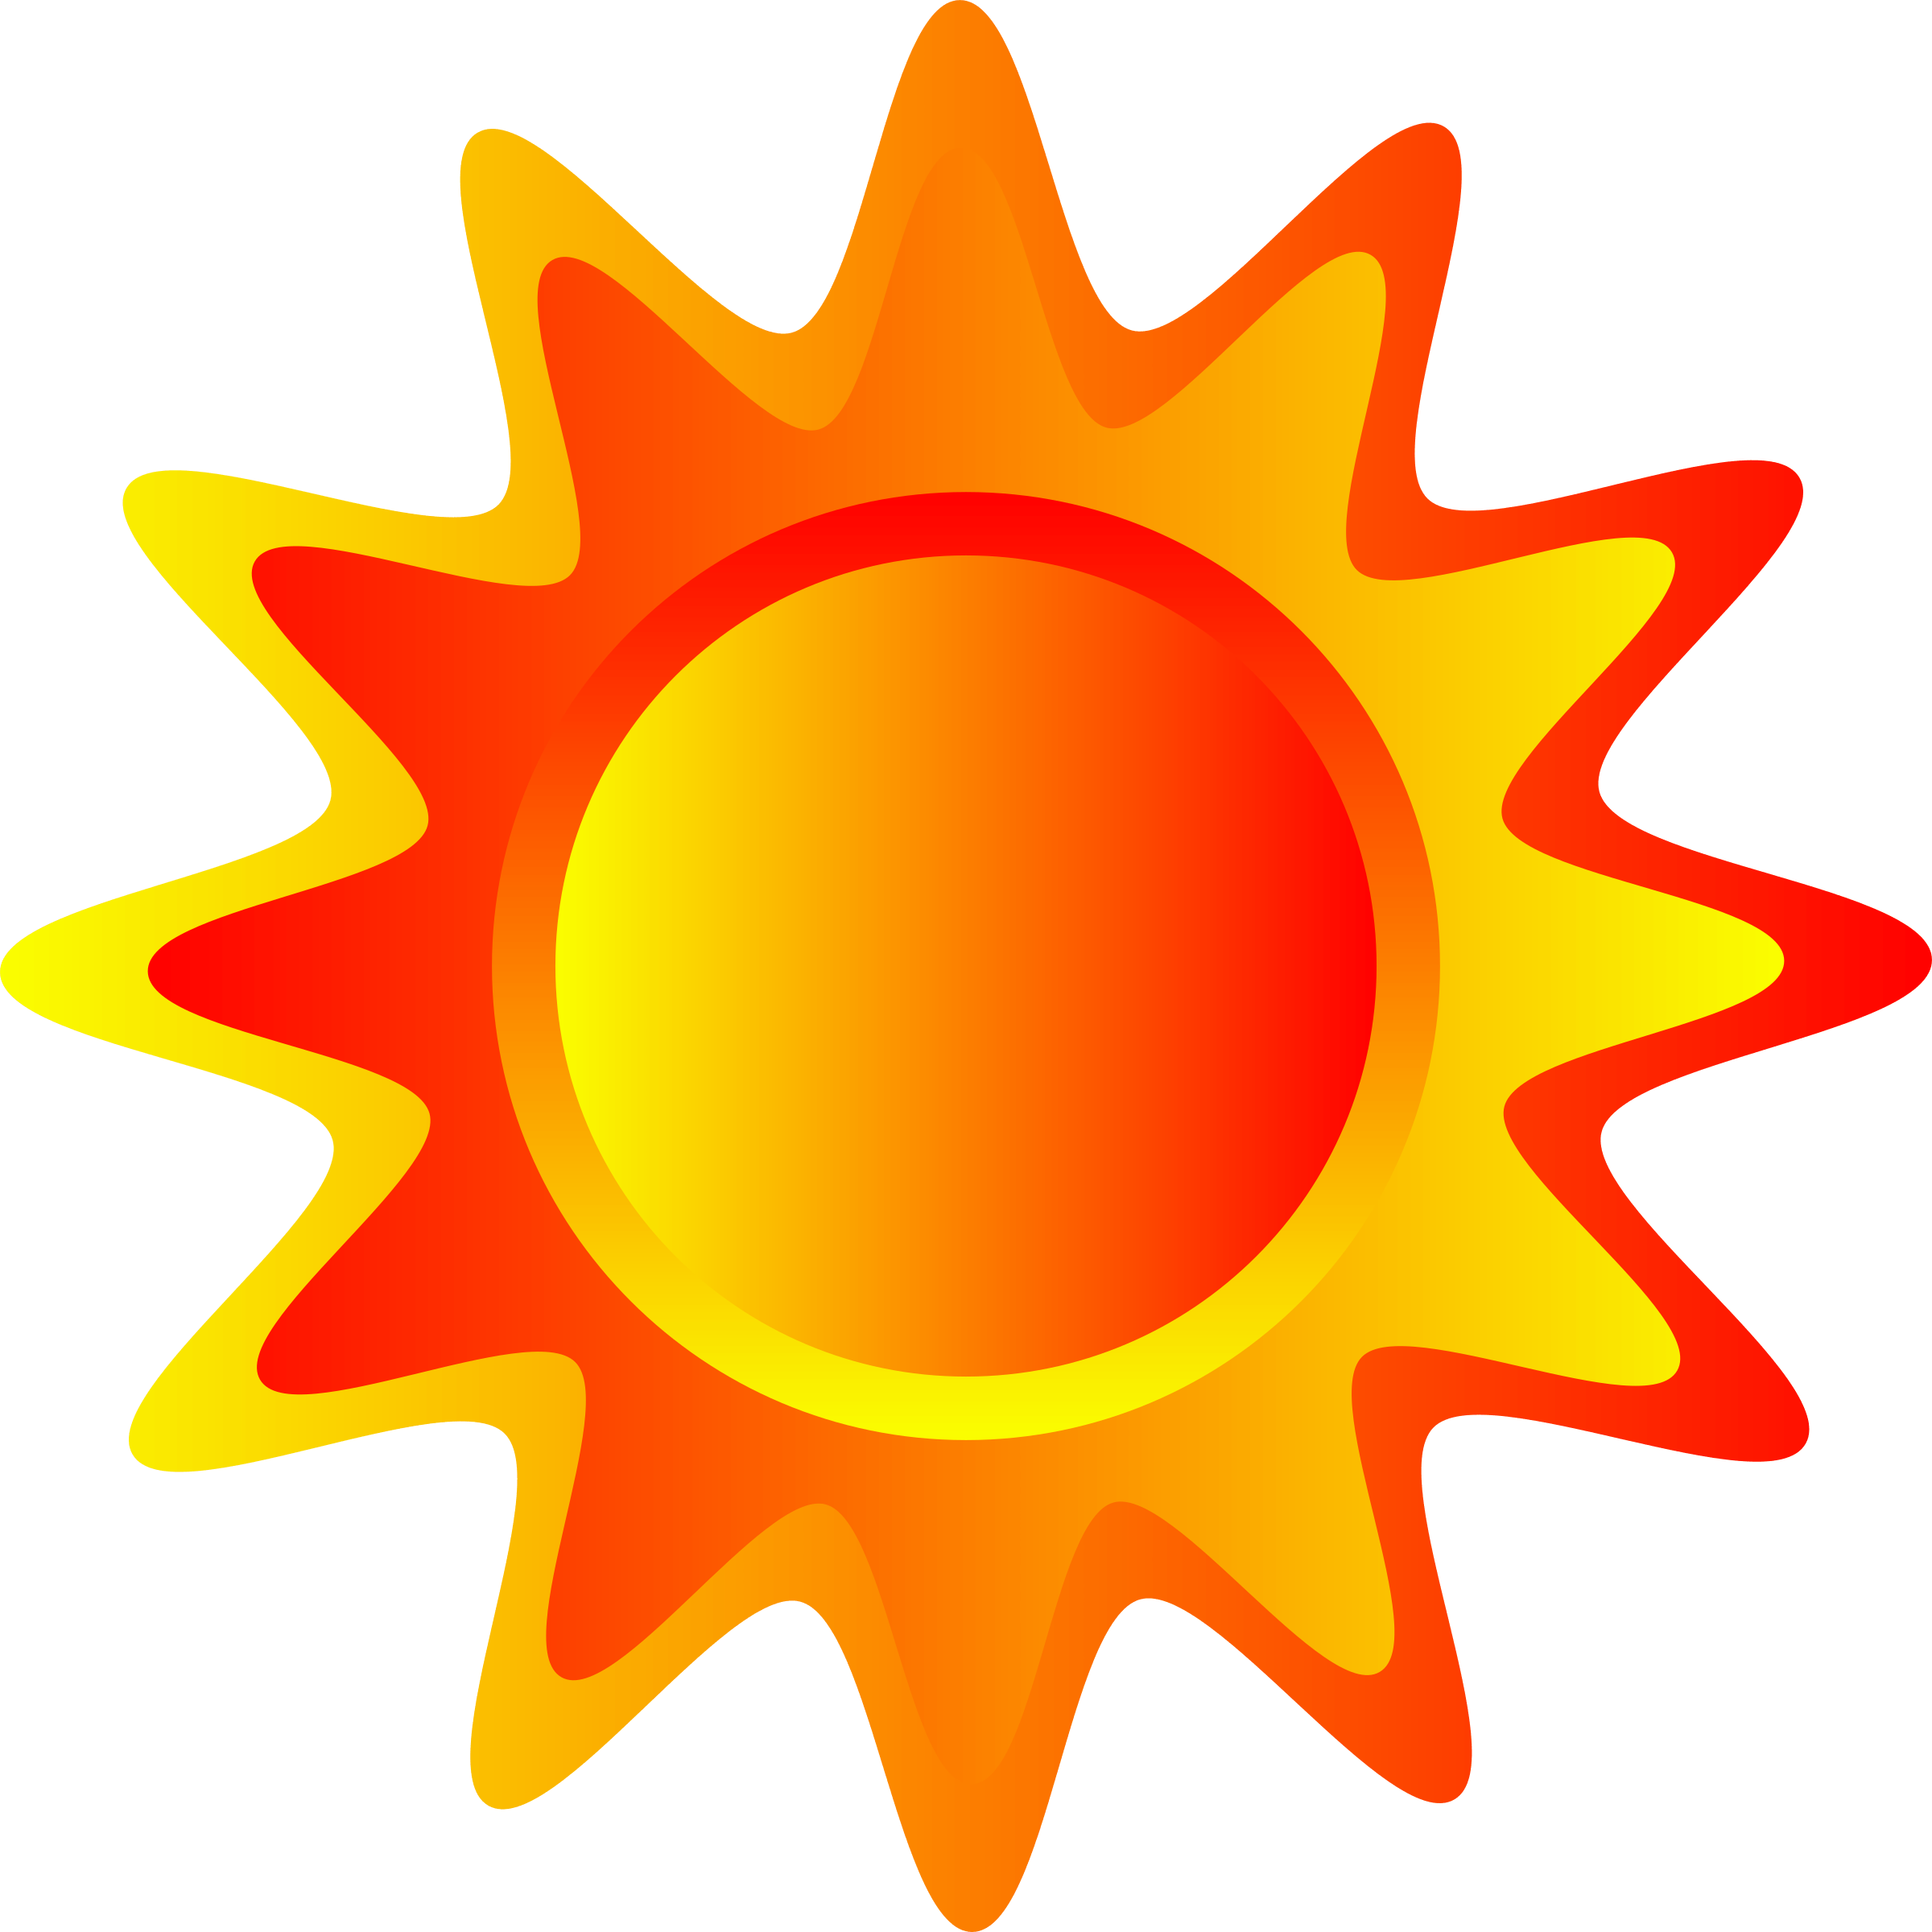 Red and Yellow Sun Logo - Clipart - Red, orange and yellow sun